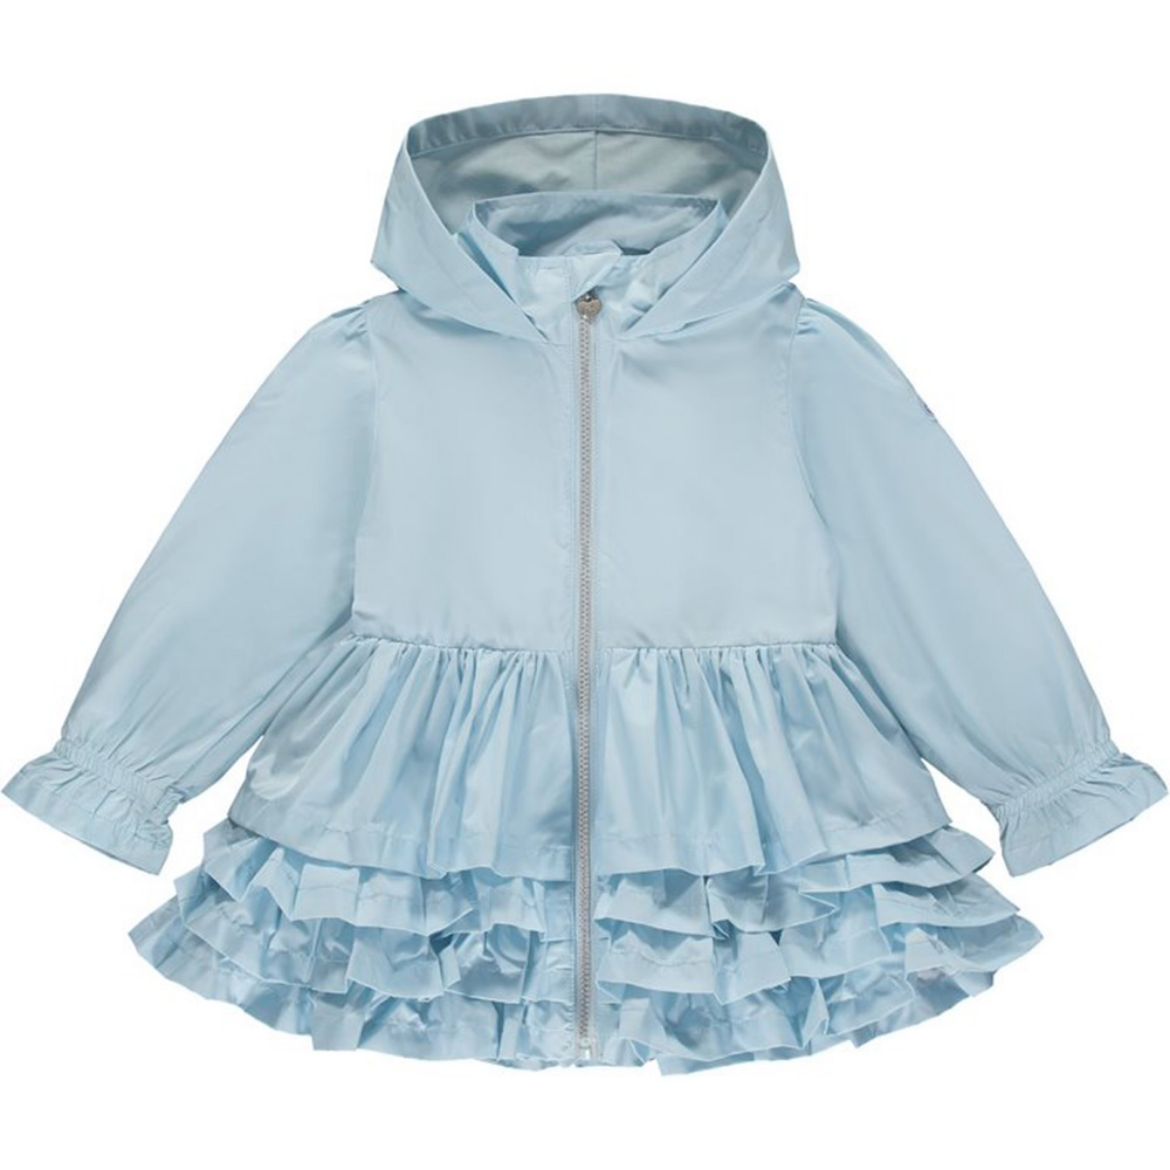 Picture of A Dee Girls 'Violet' Sky Blue Jacket